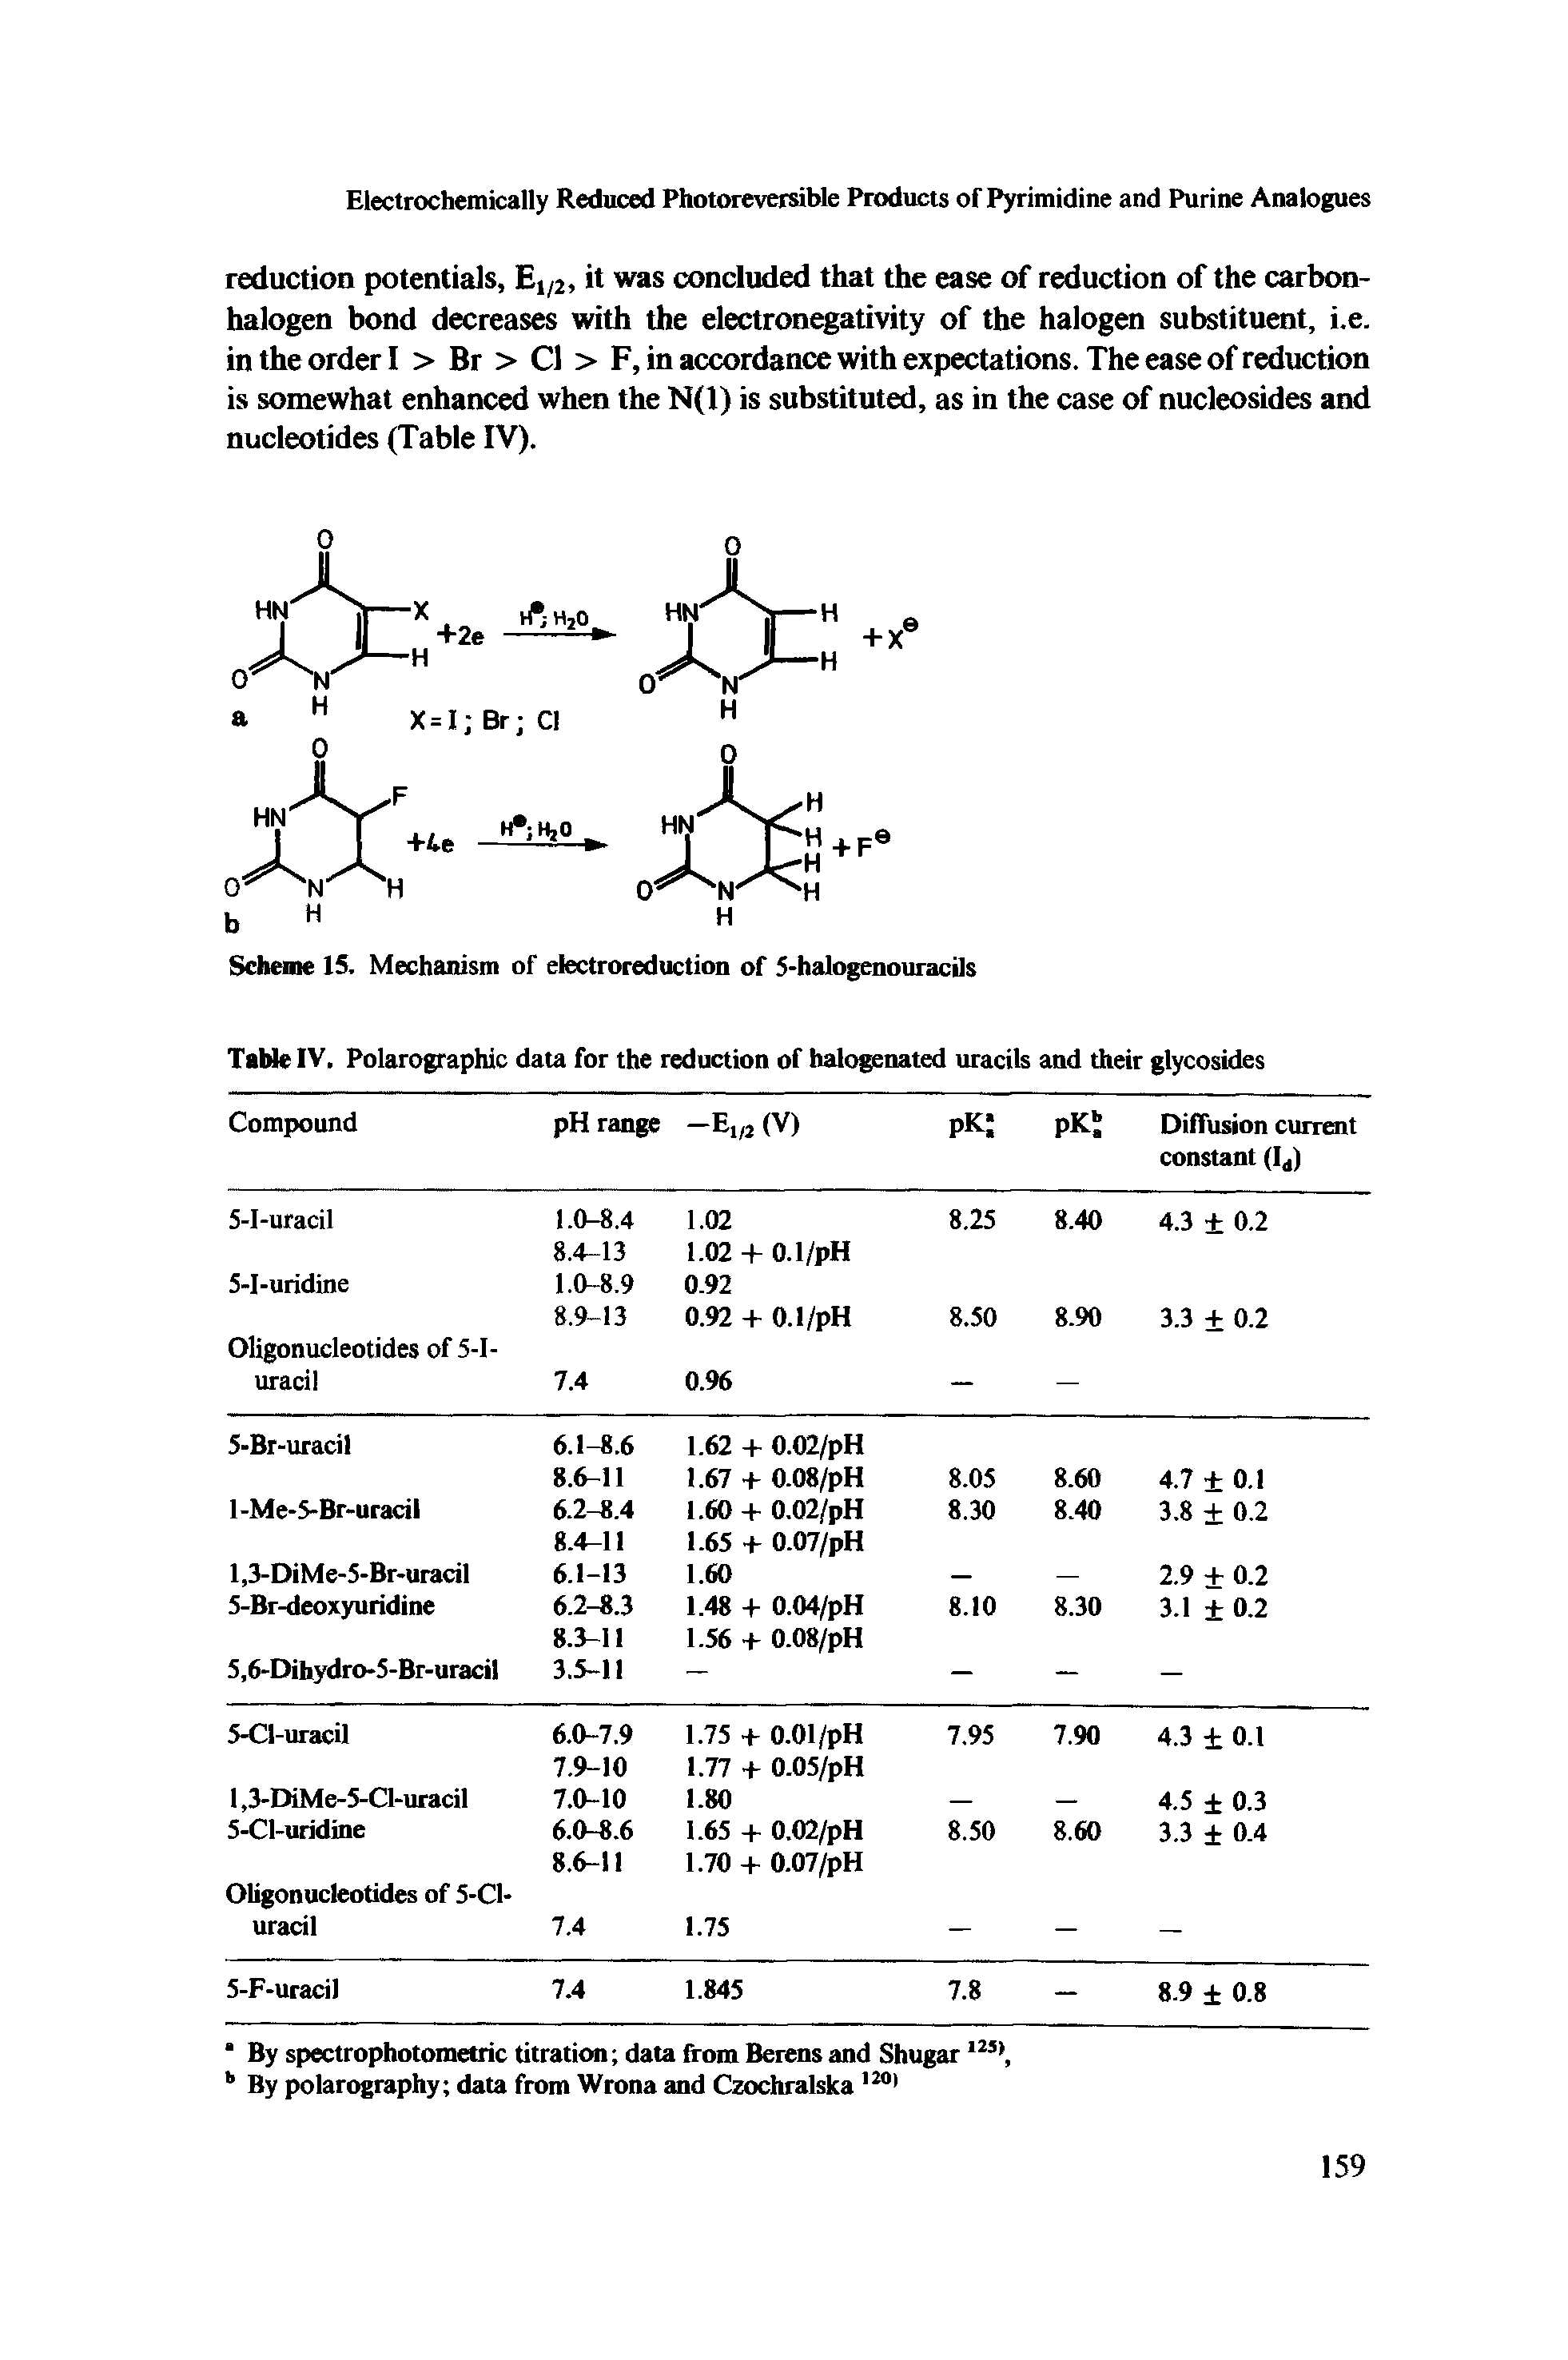 Table IV. Polarographic data for the reduction of halogenated uracils and their glycosides...